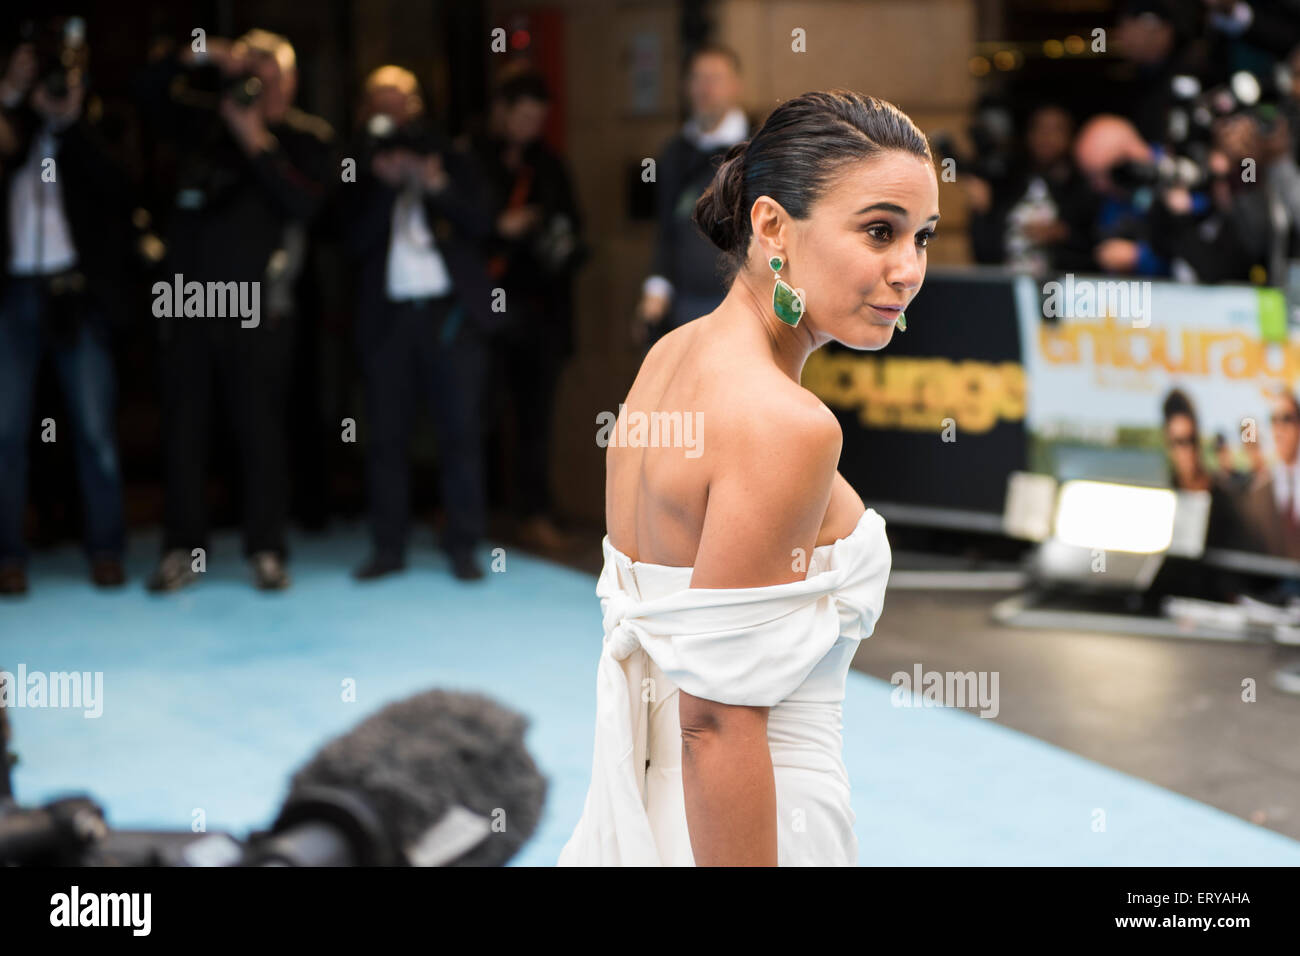 London, UK. 09th June, 2015. Emmanuelle Chriqui stands on the blue carpet at the London premiere of the Entourage movie in Leicester square. Credit:  Peter Manning/Alamy Live News Stock Photo